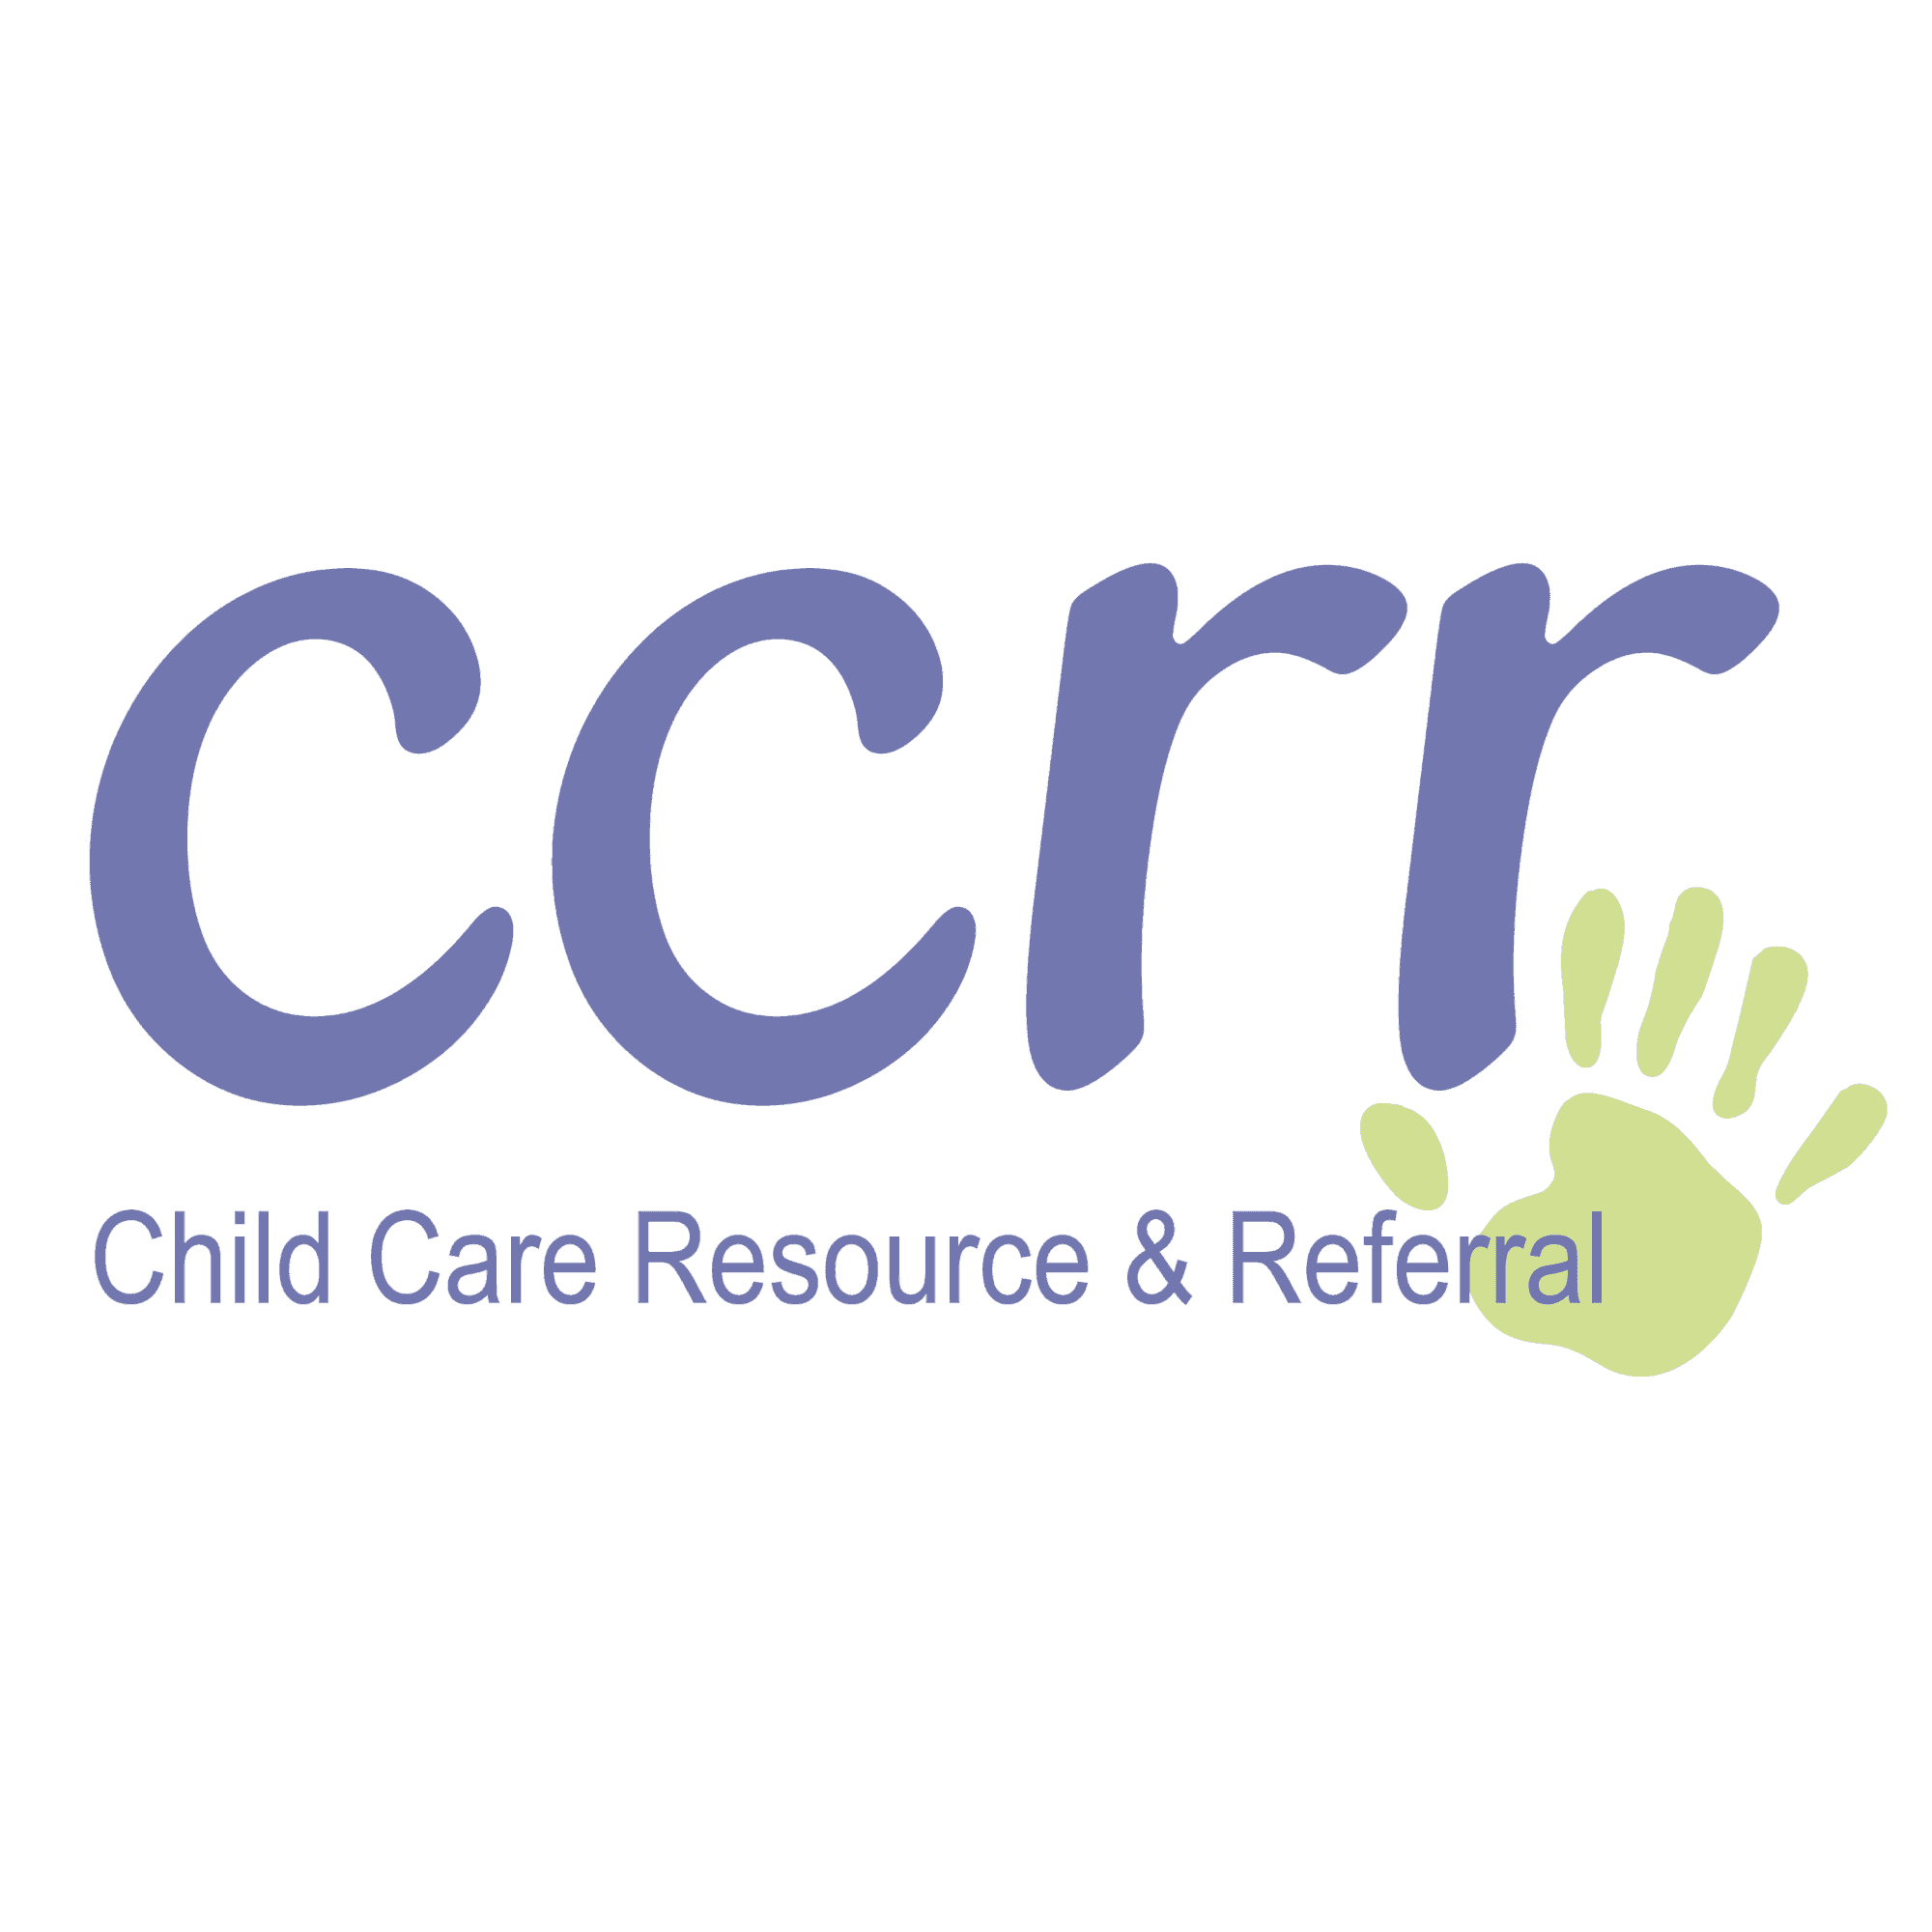 <p><span style="background-color: rgba(255, 255, 255, 0.97);">Child Care Resource &amp; Referral Program</span></p> logo